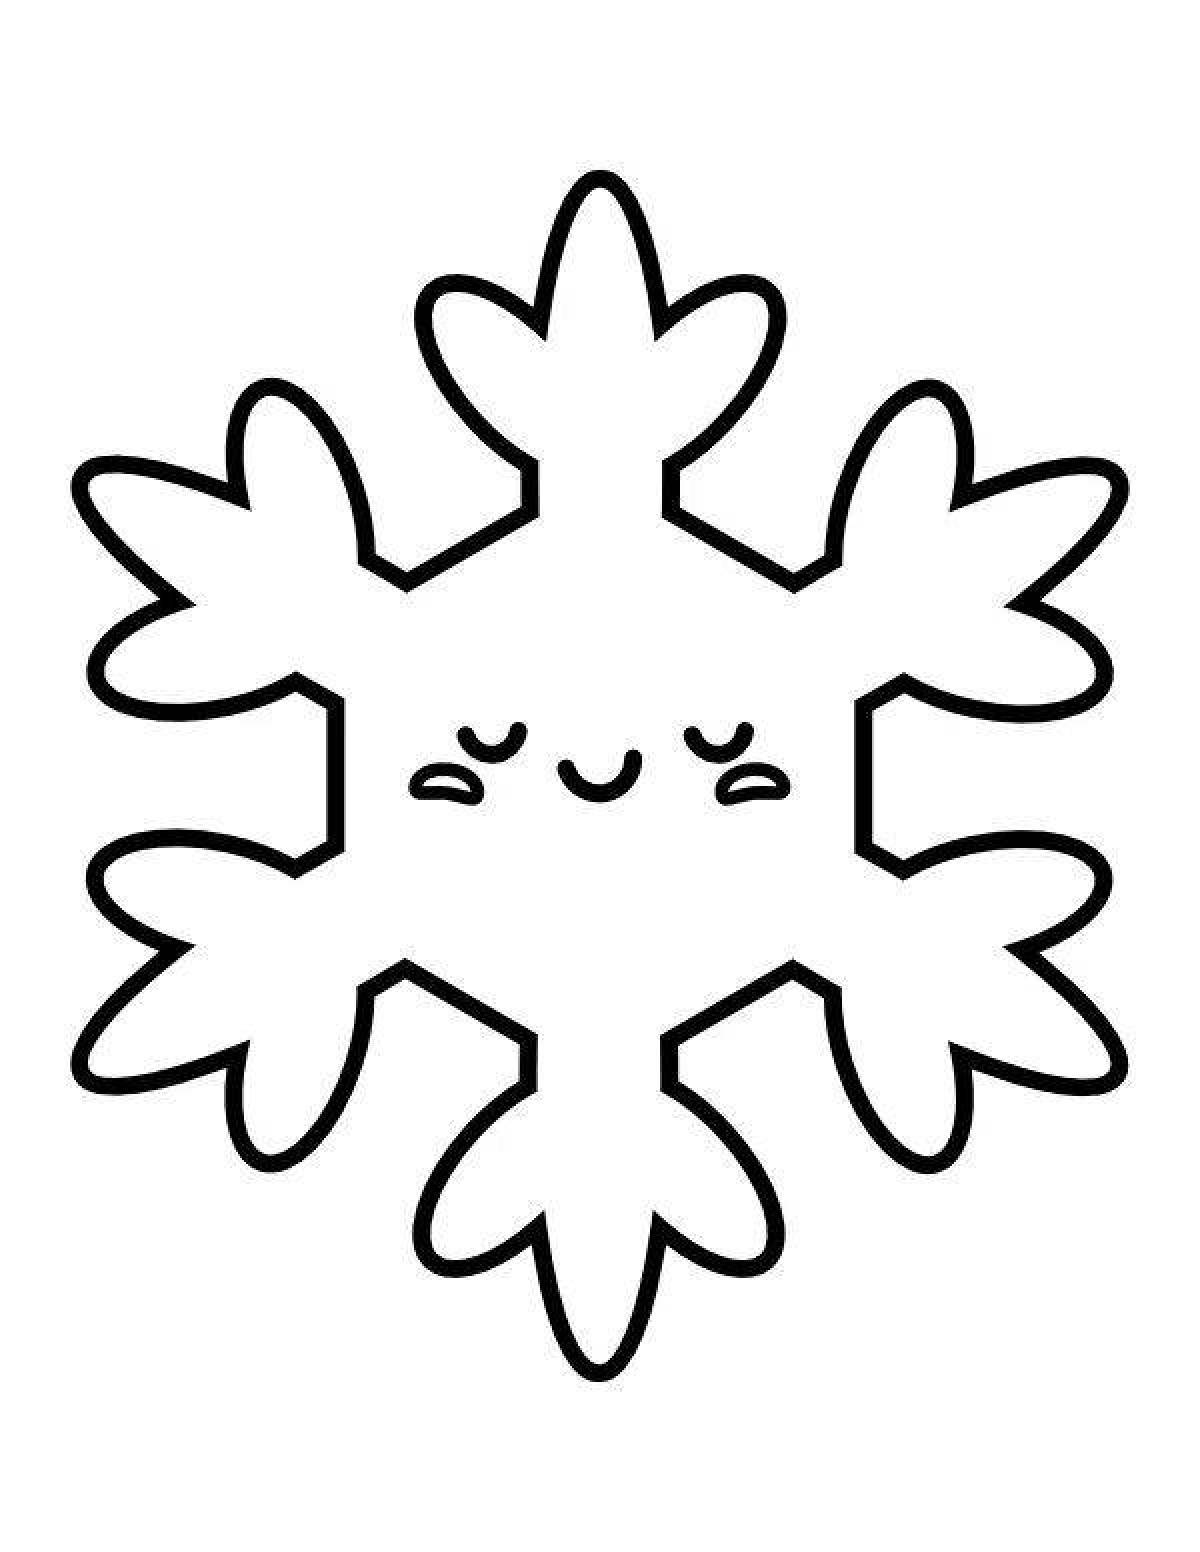 Joyful coloring pages of snowflakes for children 4-5 years old